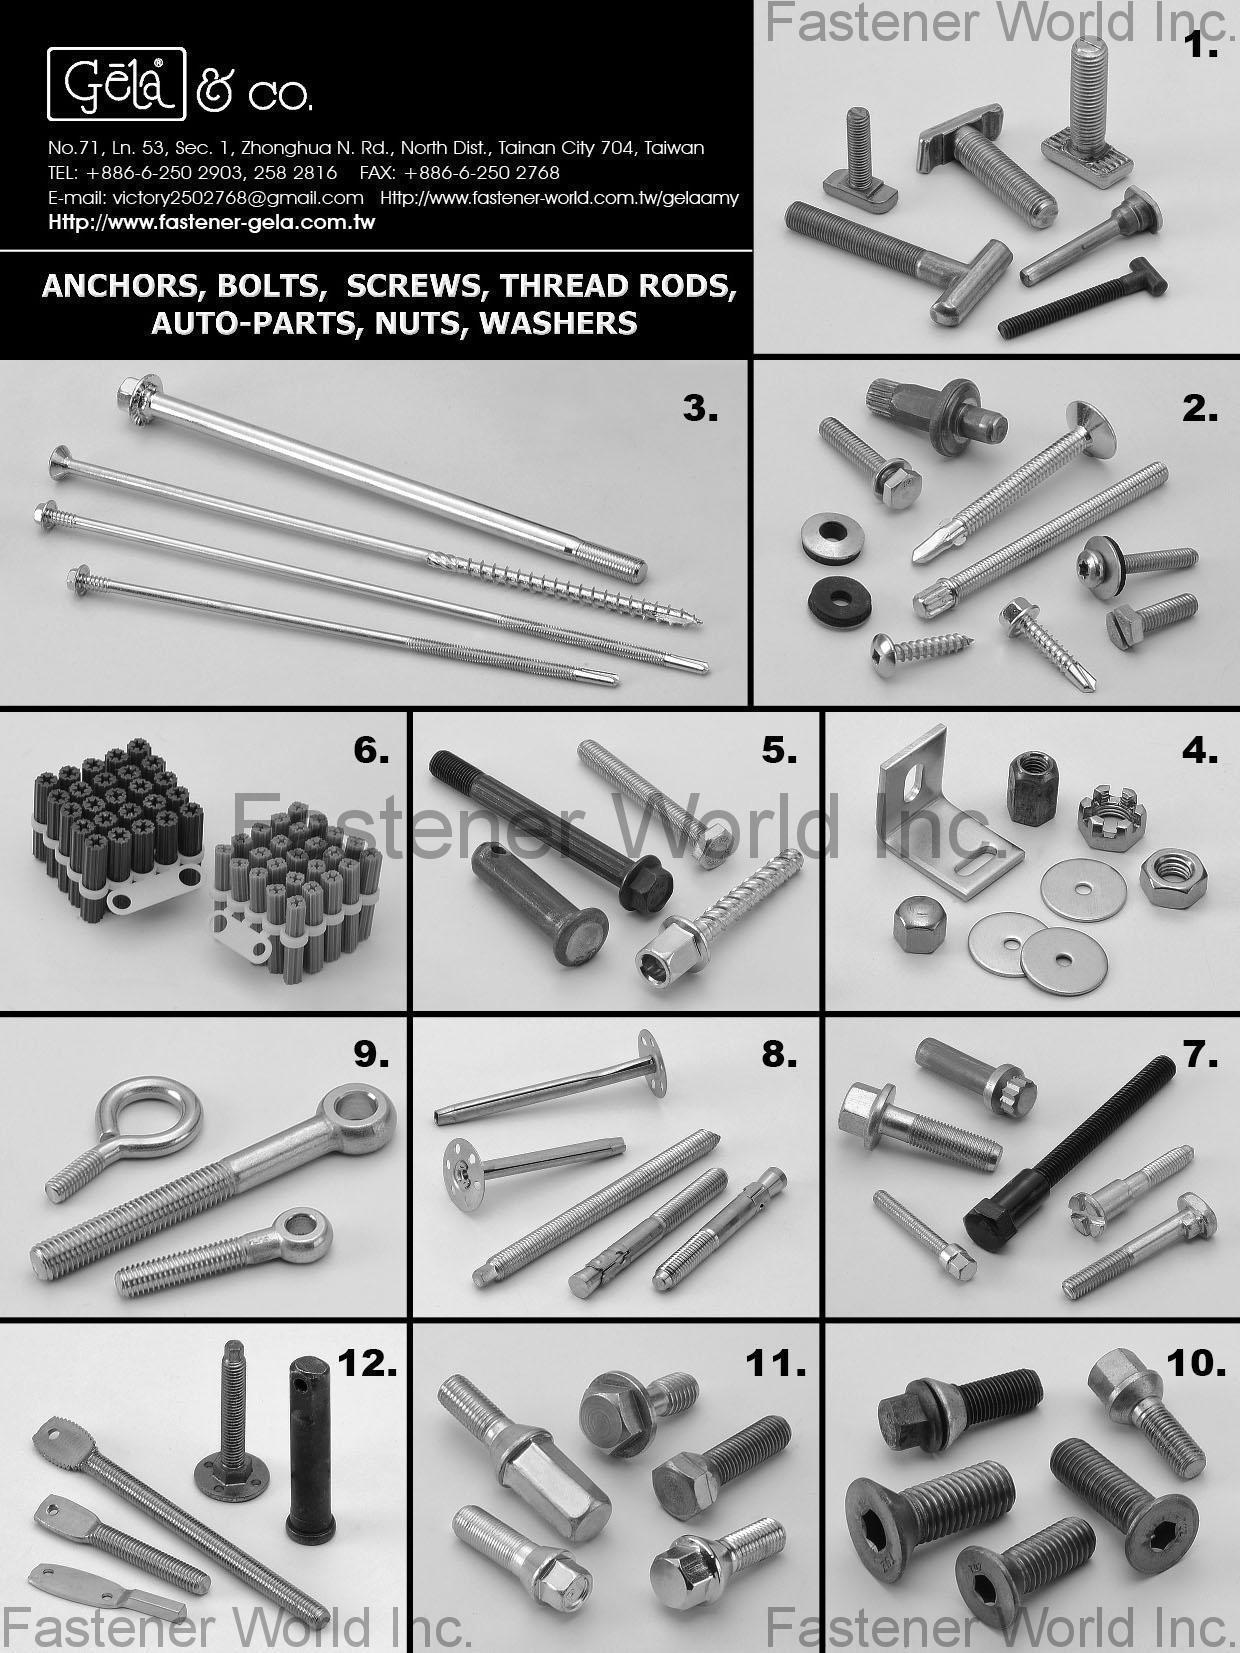 GELA & COMPANY  , Anchors, Bolts, Screws, Thread Rods, Auto-Parts, Nuts, Washers , All Kinds of Screws